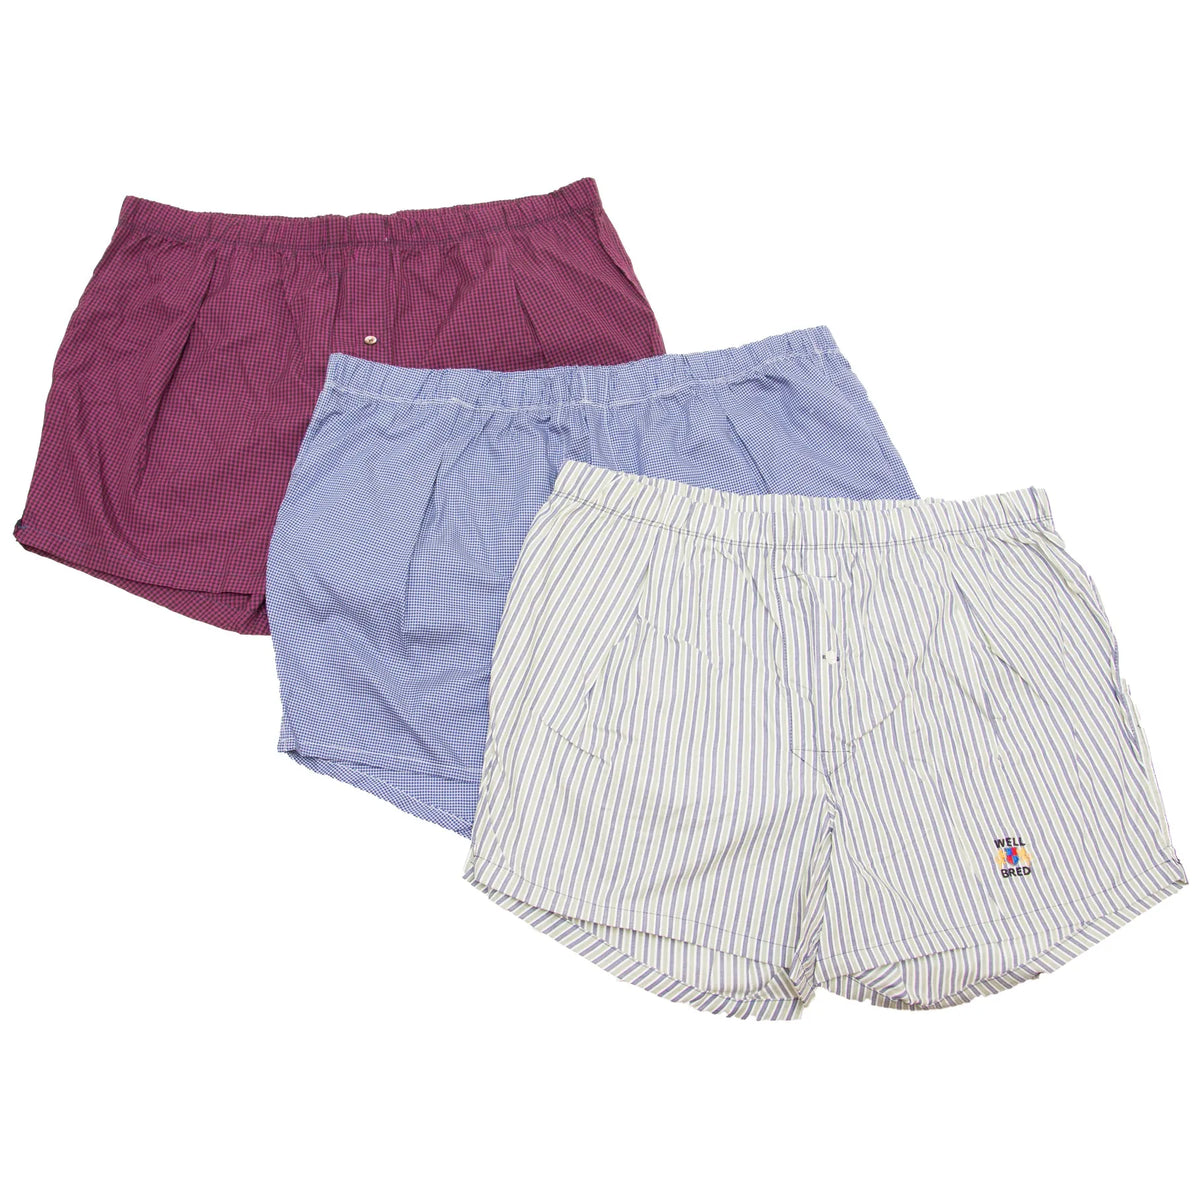 All American Boxer Shorts - All American Clothing Co